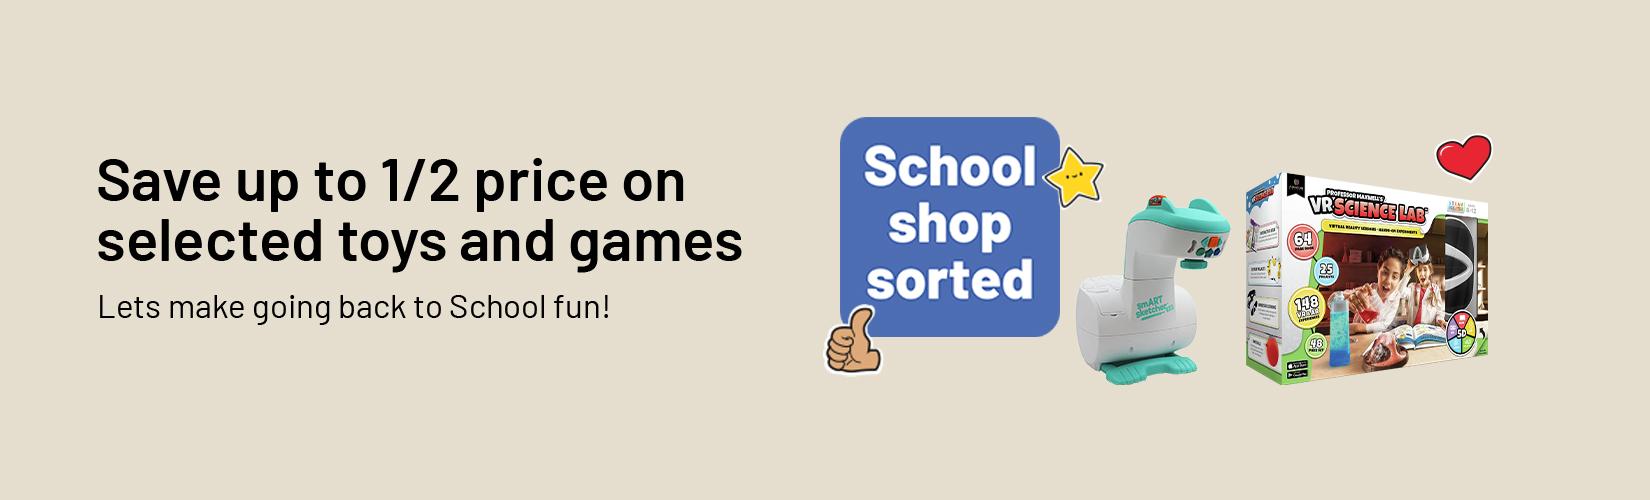 Save up to 1/2 price on selected toys and games. Lets make going back to school fun!